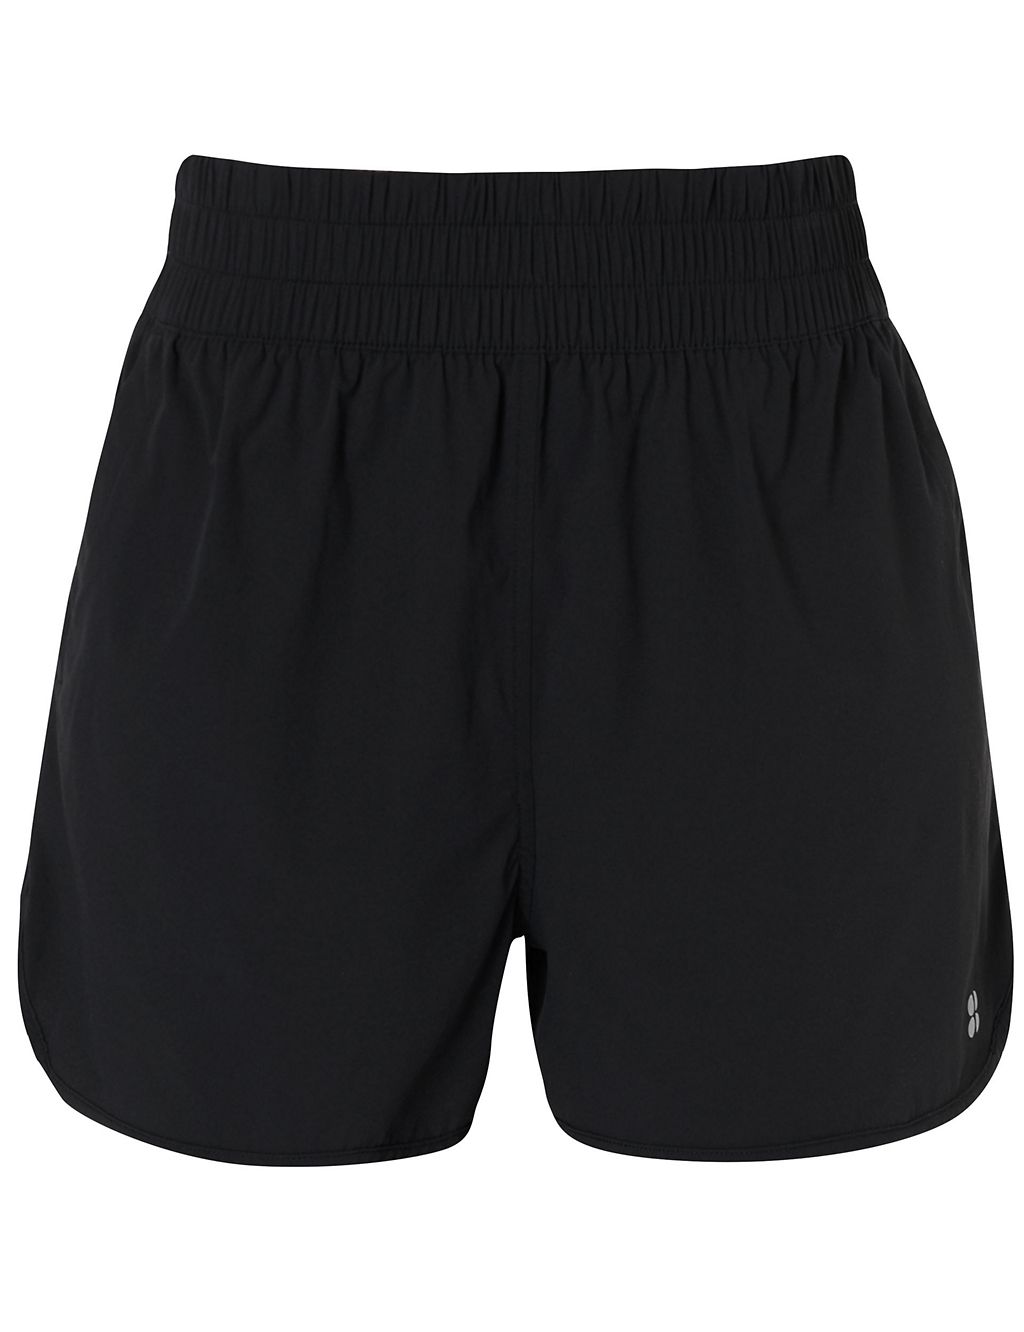 Relay High Waisted Running Shorts 1 of 6